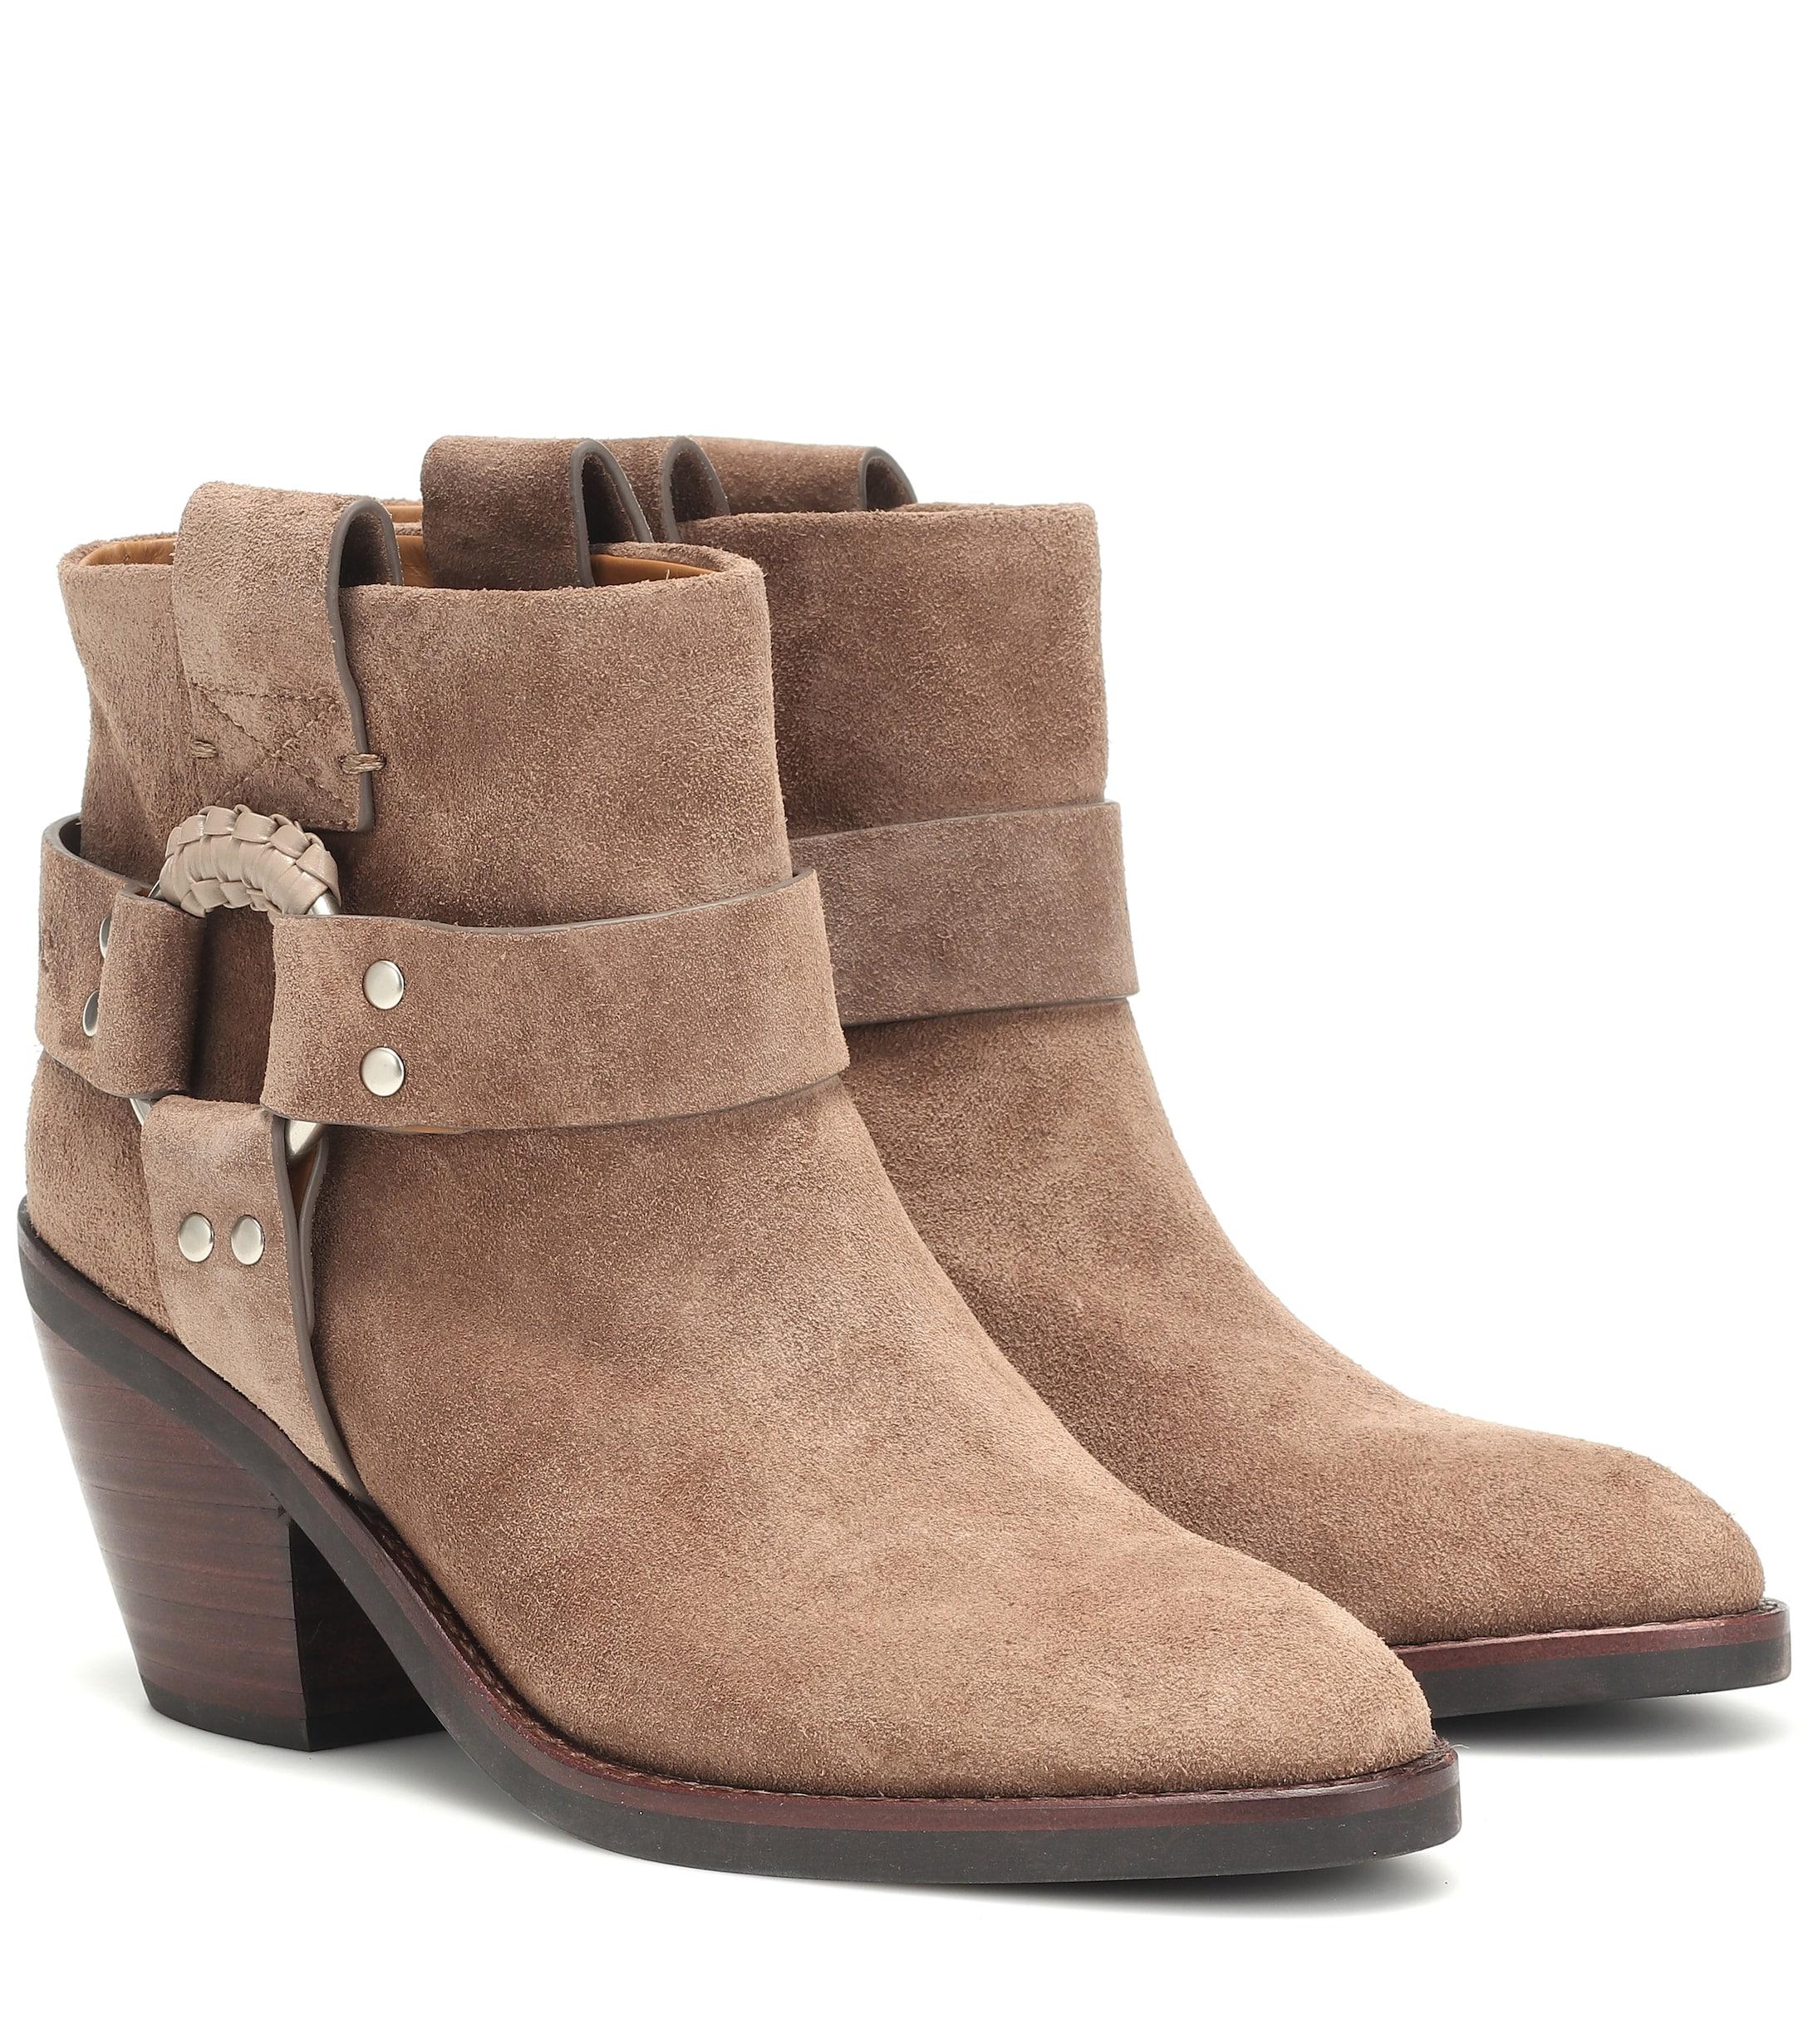 See By Chloé Eddy Suede Ankle Boots in Beige (Natural) - Lyst